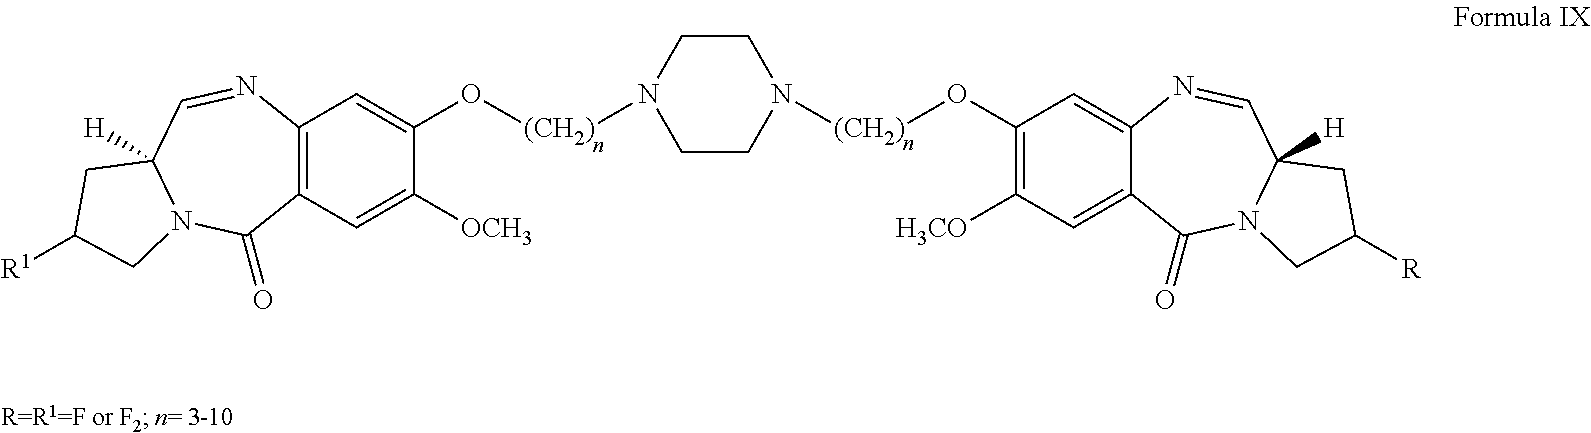 C2-fluoro substituted piperazine linked pyrrolo[2,1-C][1,4] benzodiazepine dimers and a process for the preparation thereof